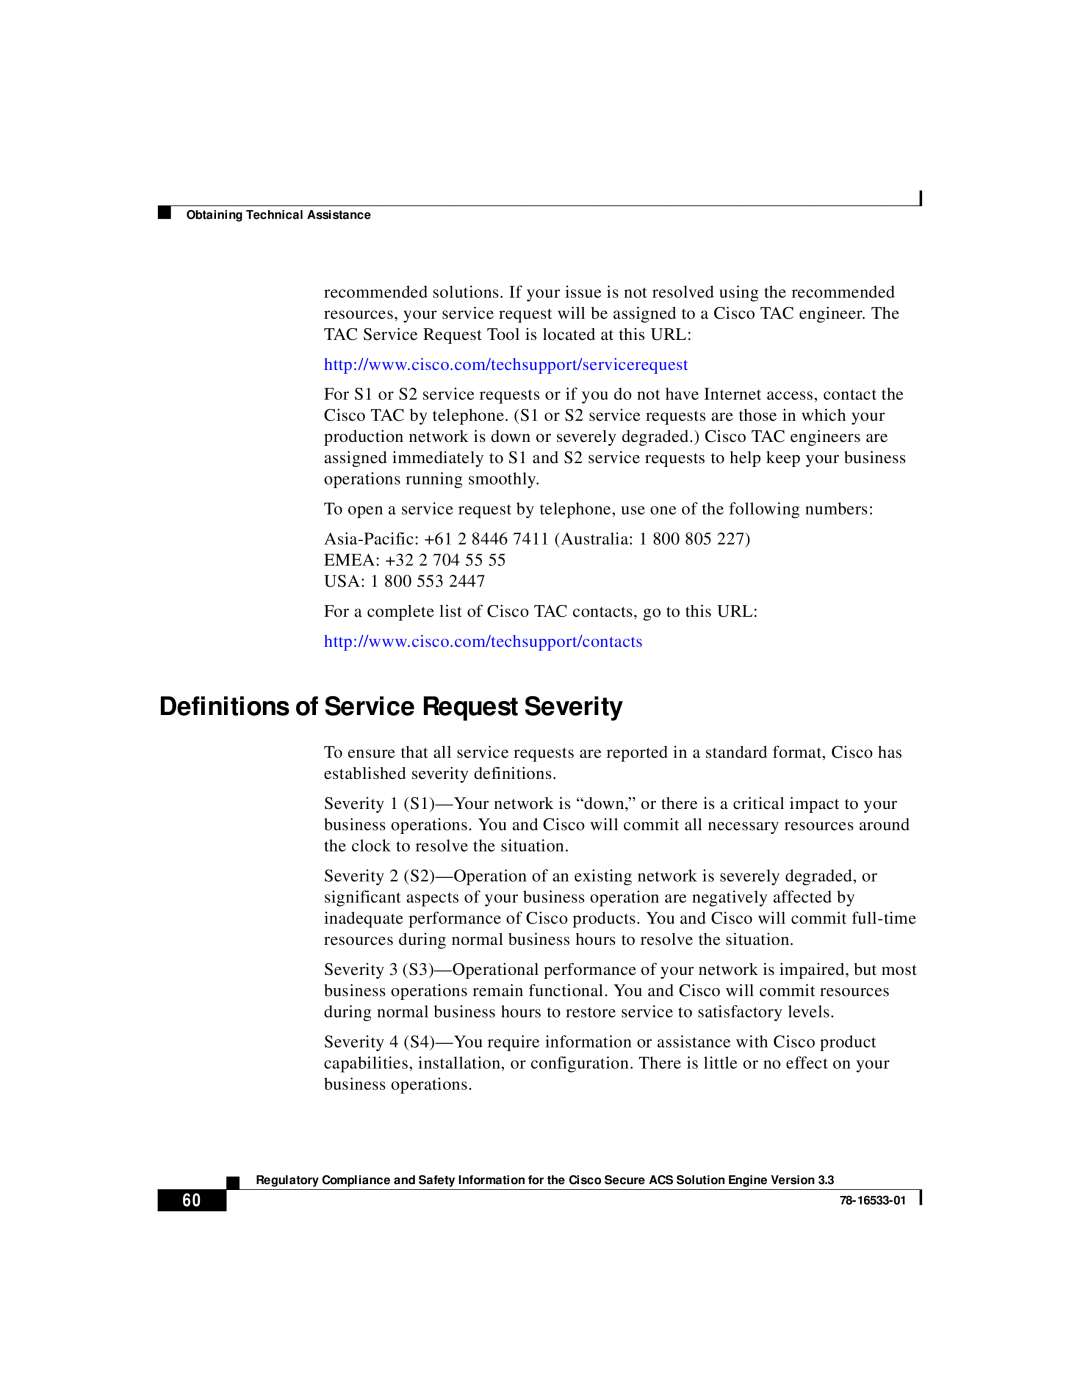 Cisco Systems CSACSE-1112-K9 manual Definitions of Service Request Severity 